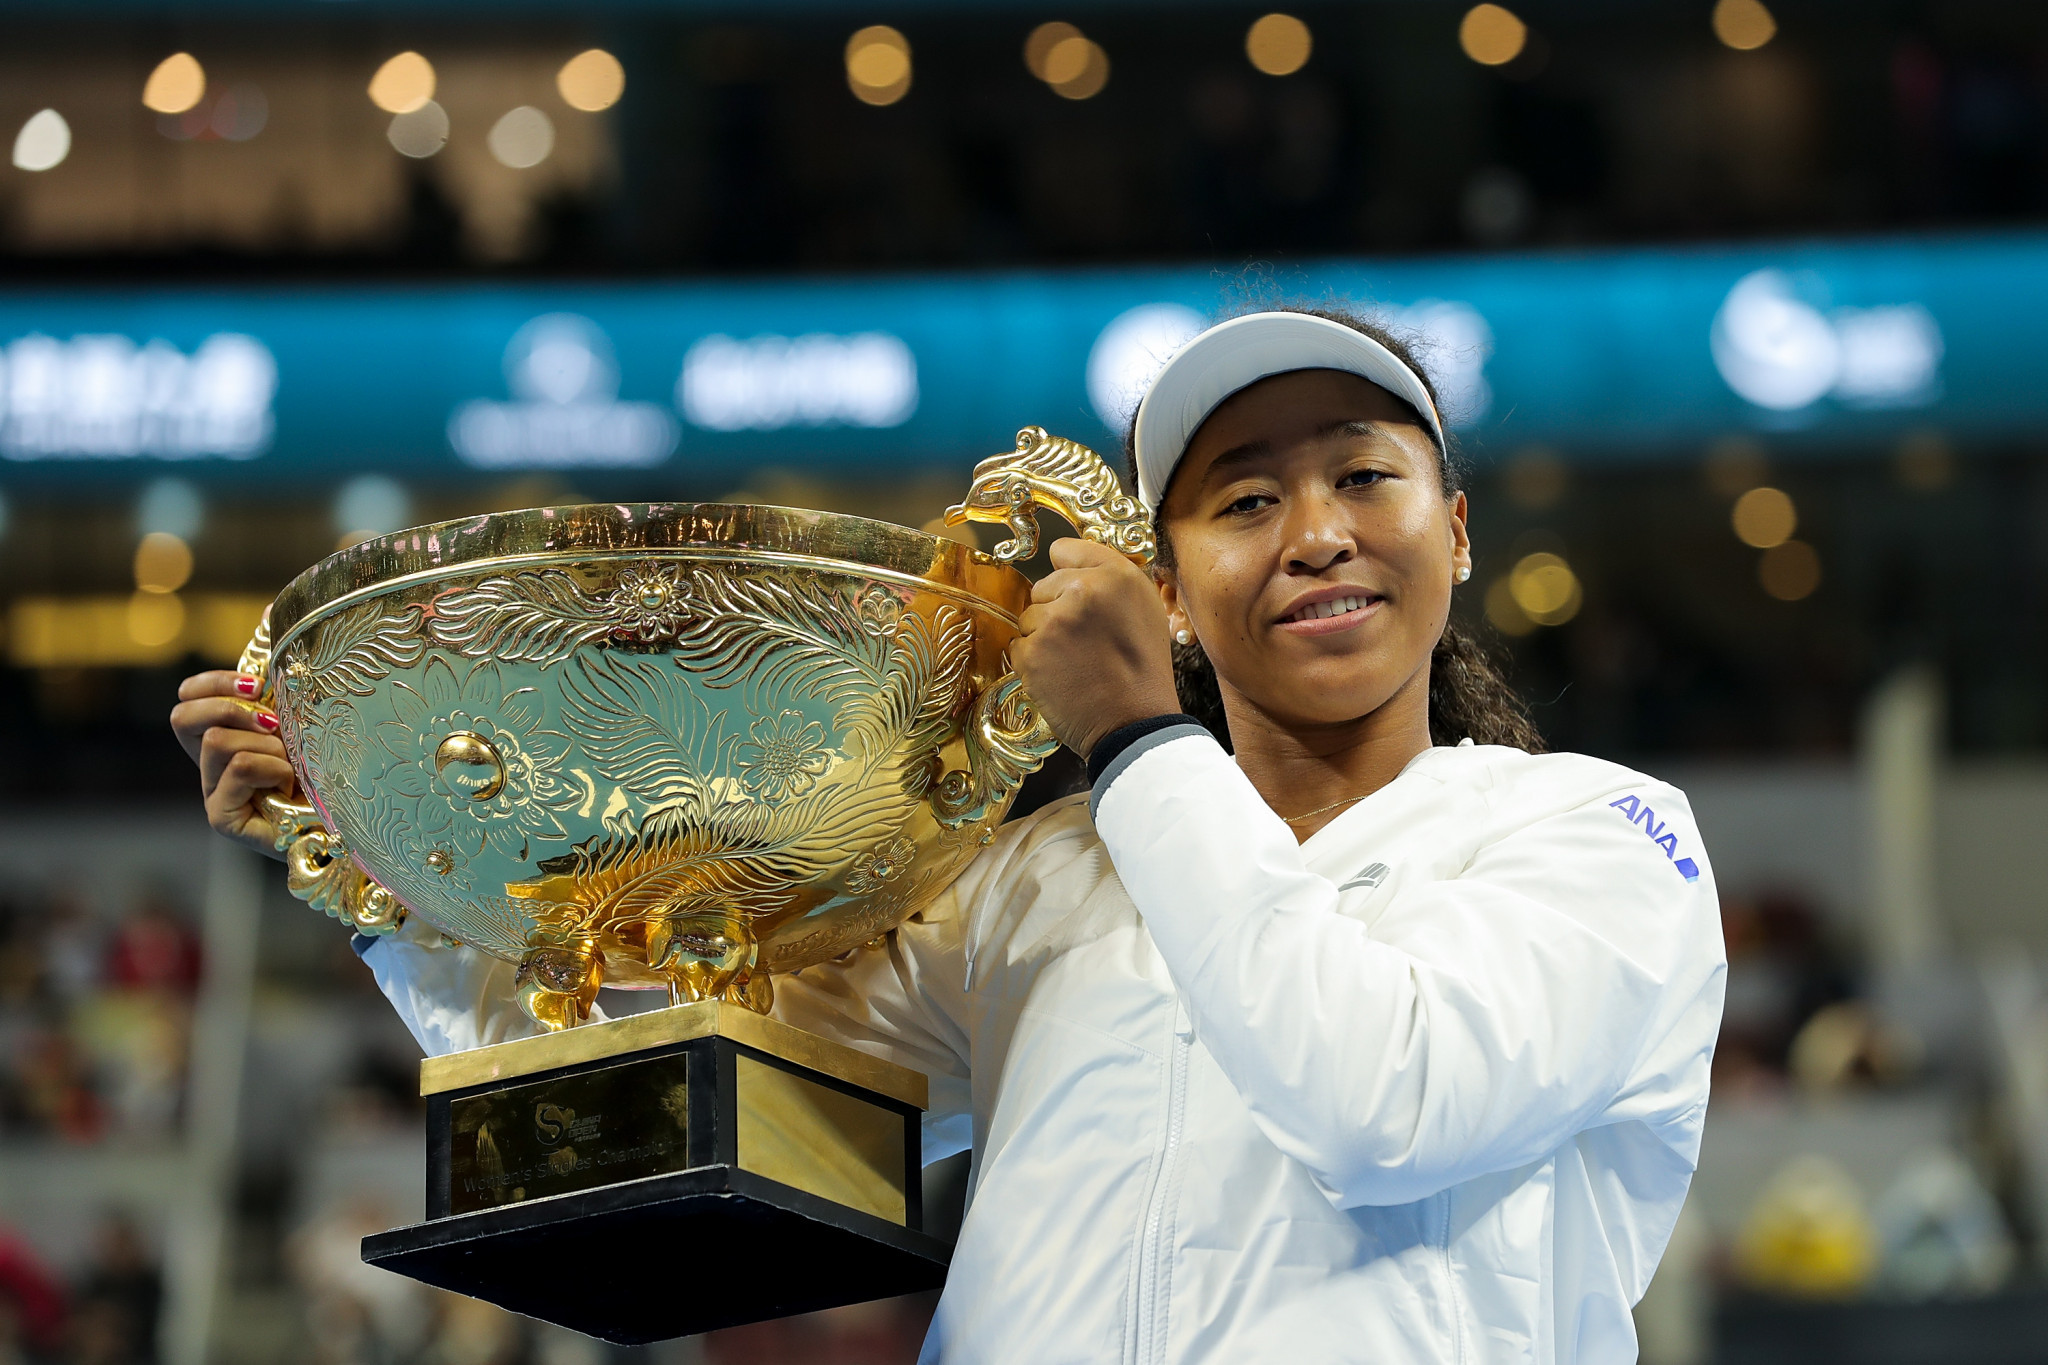 Naomi Osaka came from behind to win the China Open ©Getty Images